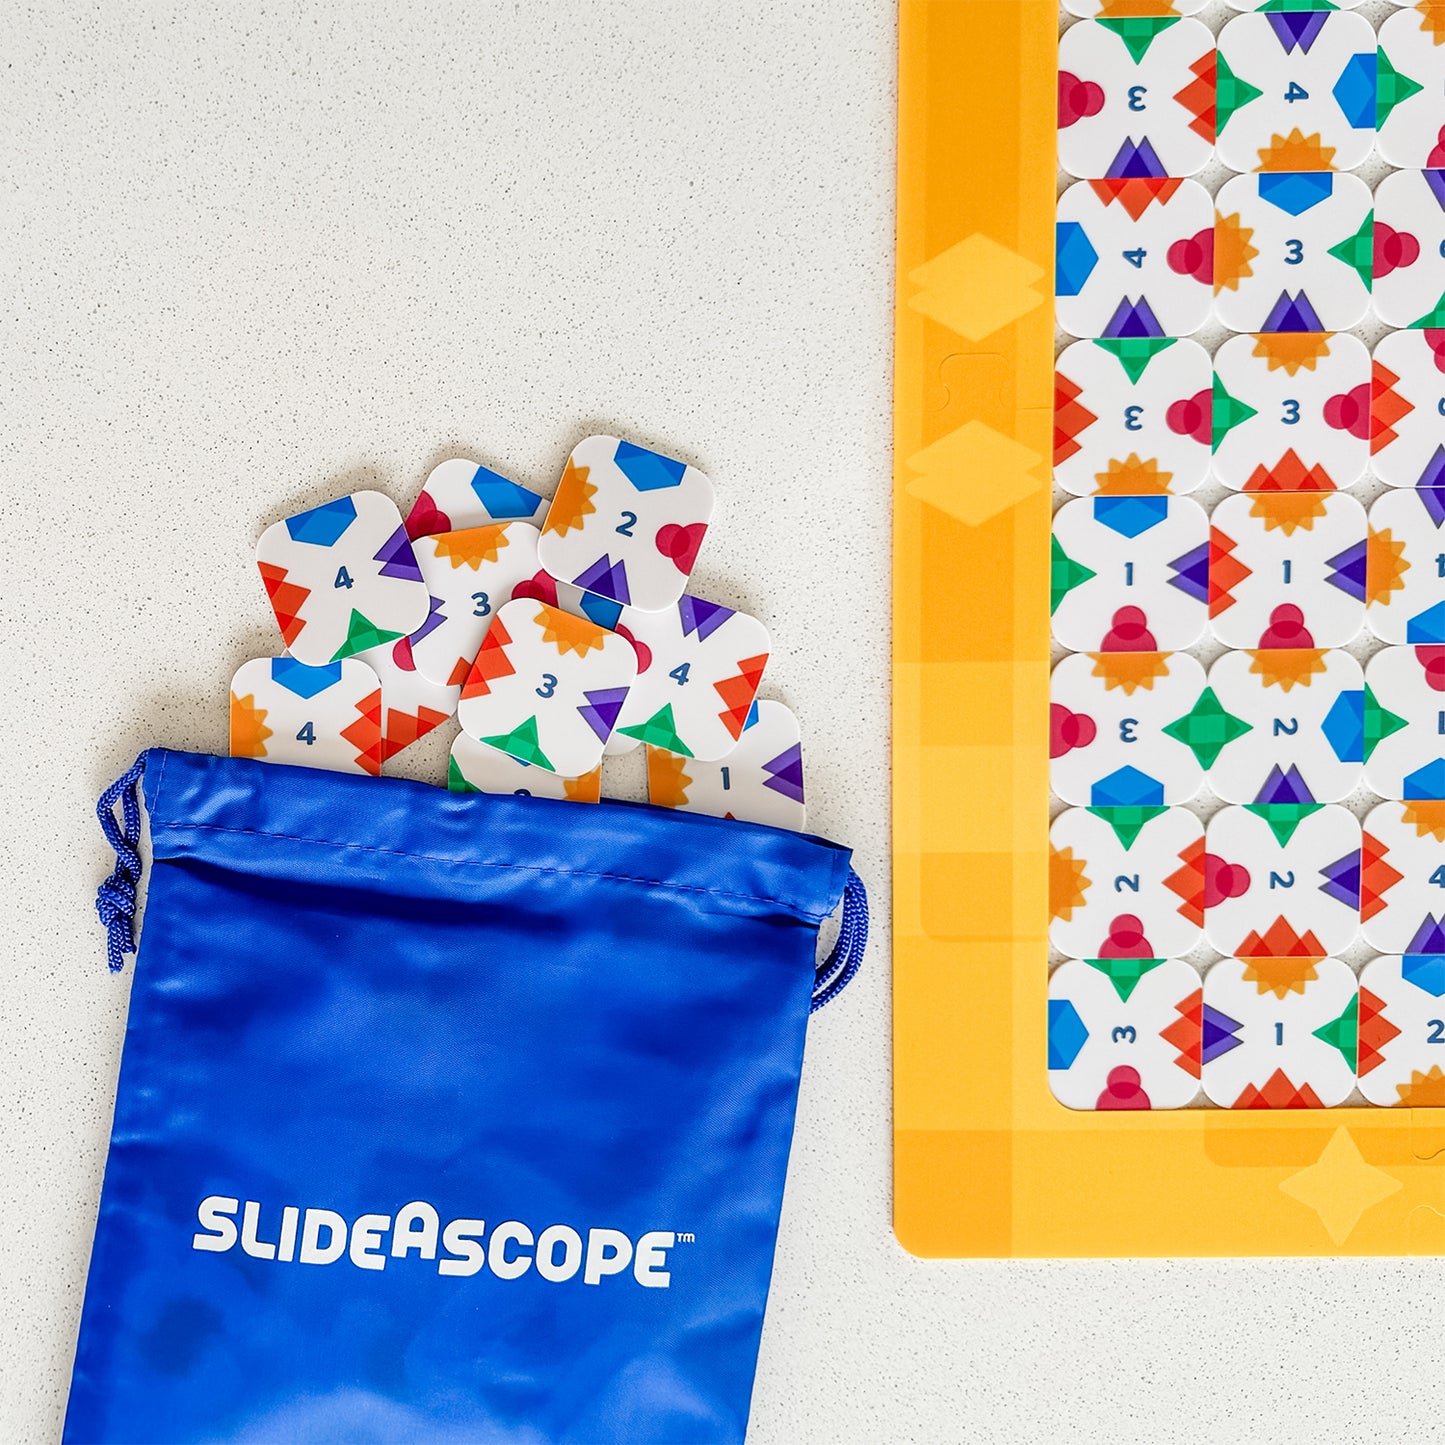 SlideAscope by SimplyFun is a spatial reasoning and critical thinking game for 1-5 players.